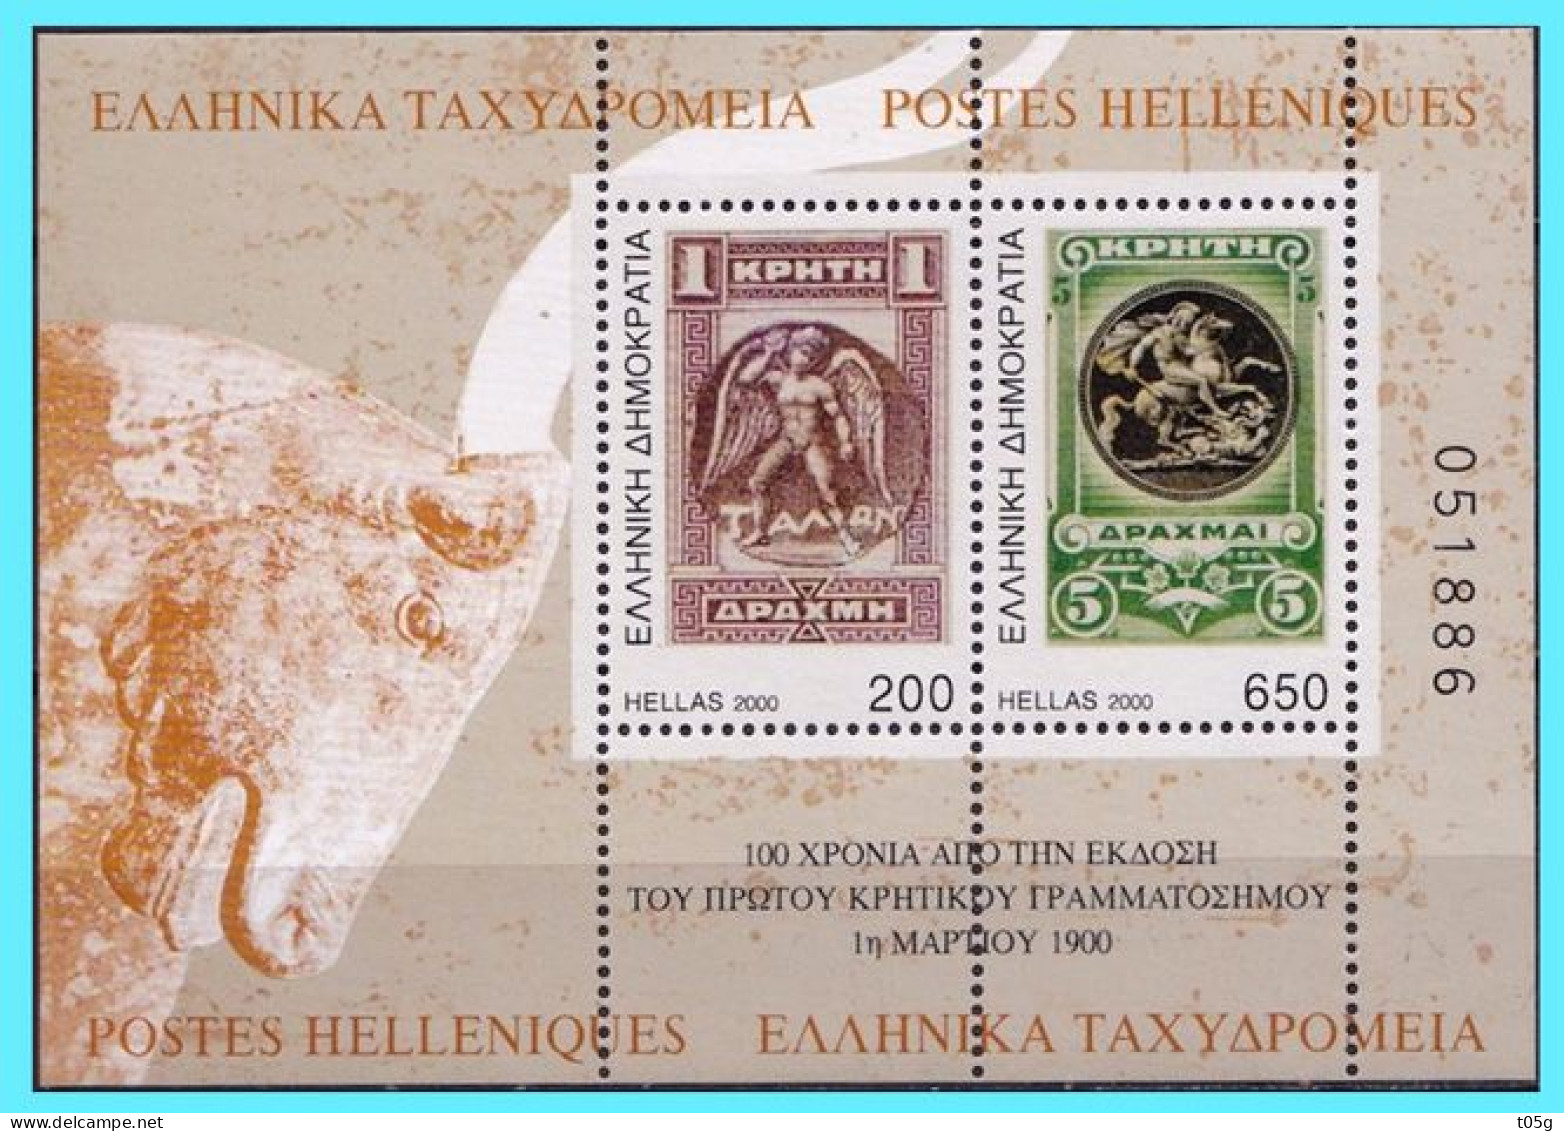 GREECE- GRECE- HELLAS 2000:  The Stamps Of Crete Miniature Sheet MNH** - Unused Stamps